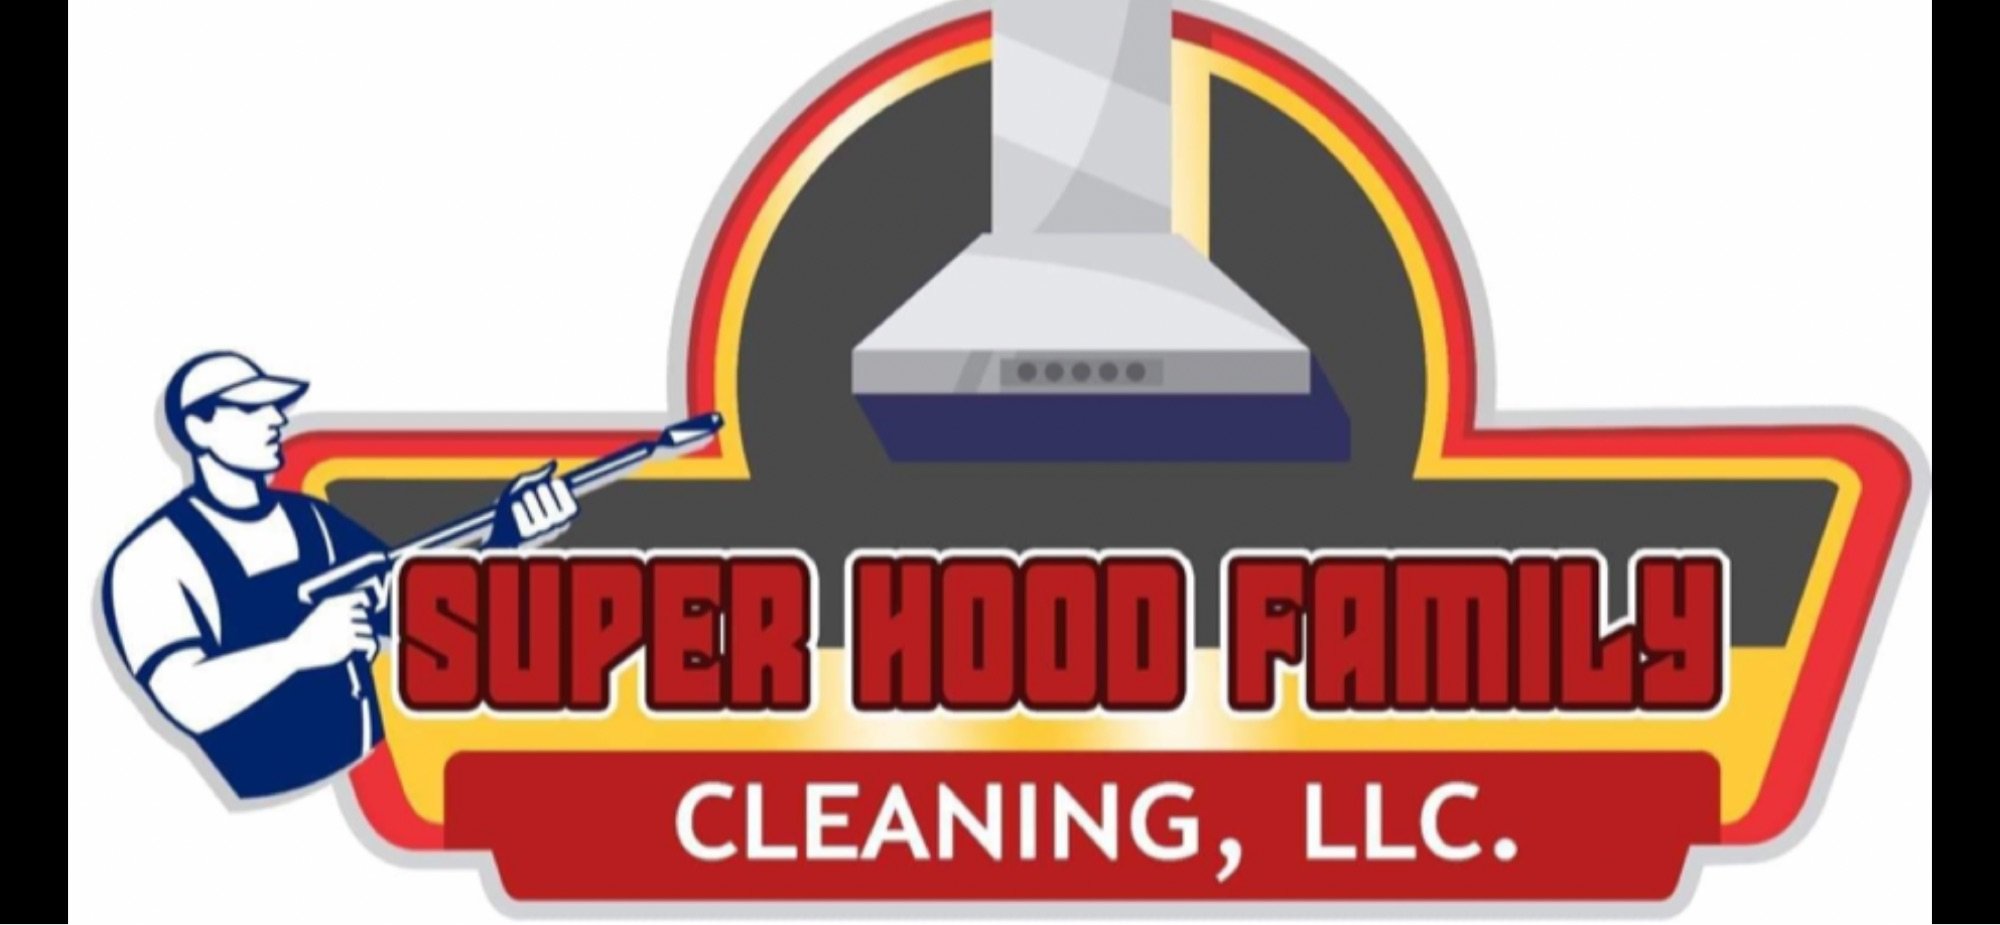 Super Hood Family Cleaning Logo